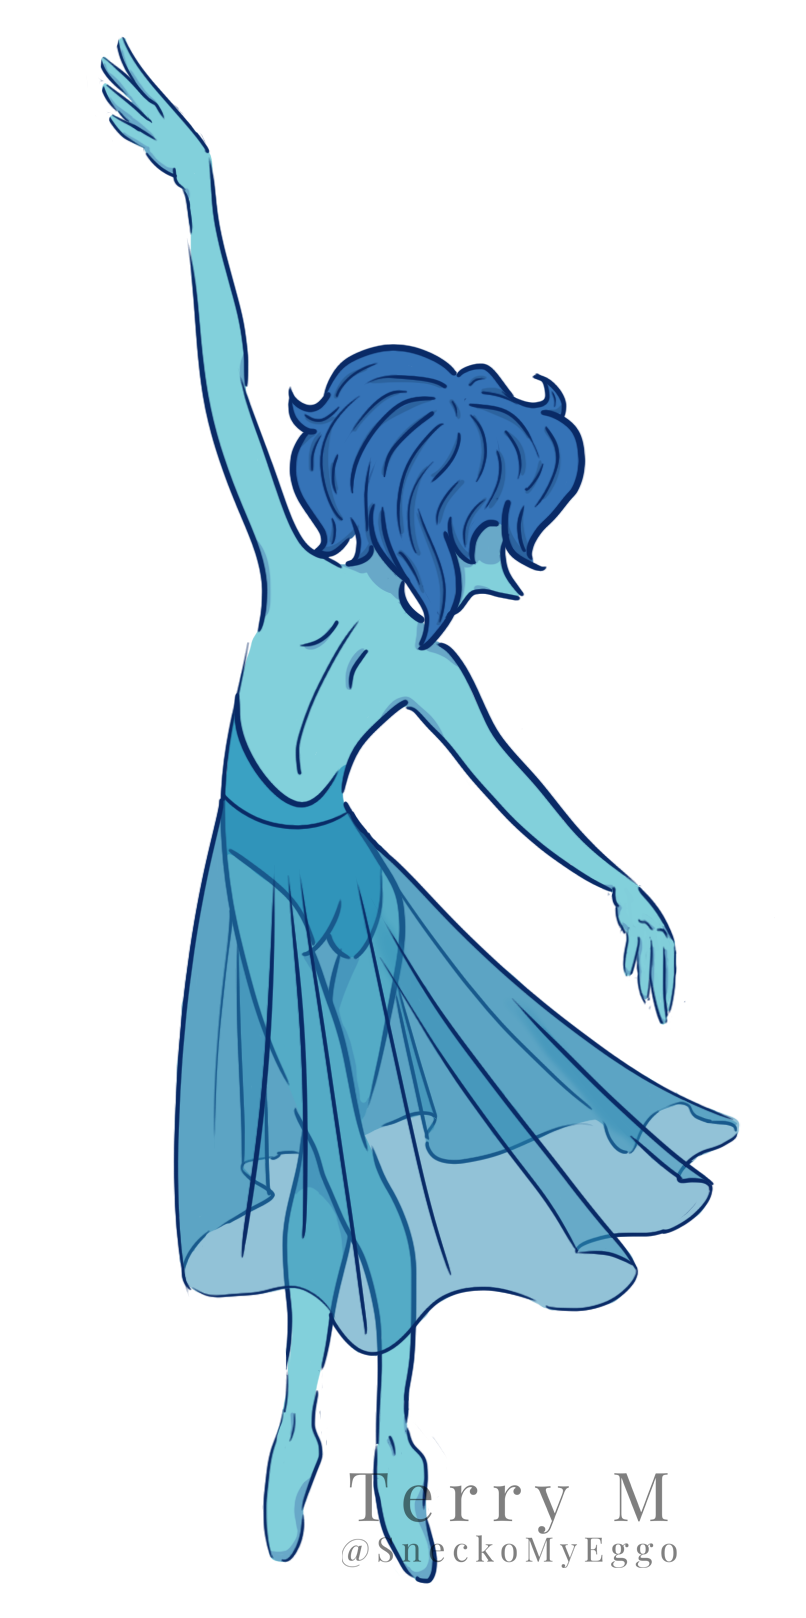 When I used to watch Steven Universe Blue pearl was my favourite. I wonder what’s happened to her now.